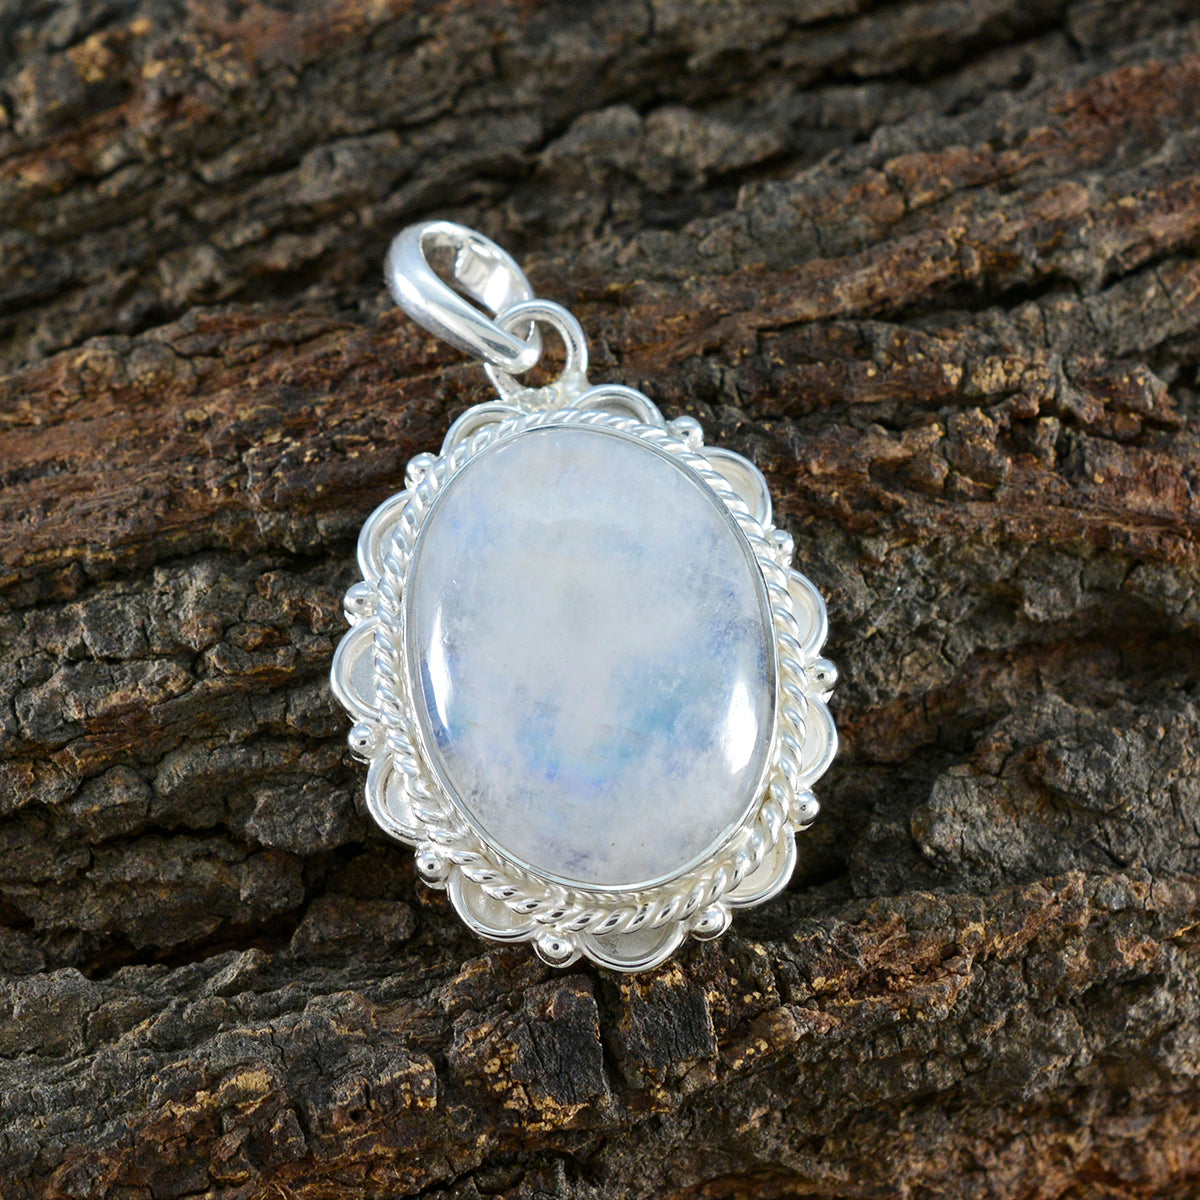 Riyo Beddable Gemstone Oval Cabochon White Rainbow Moonstone 1204 Sterling Silver Pendant Gift For Girlfriend